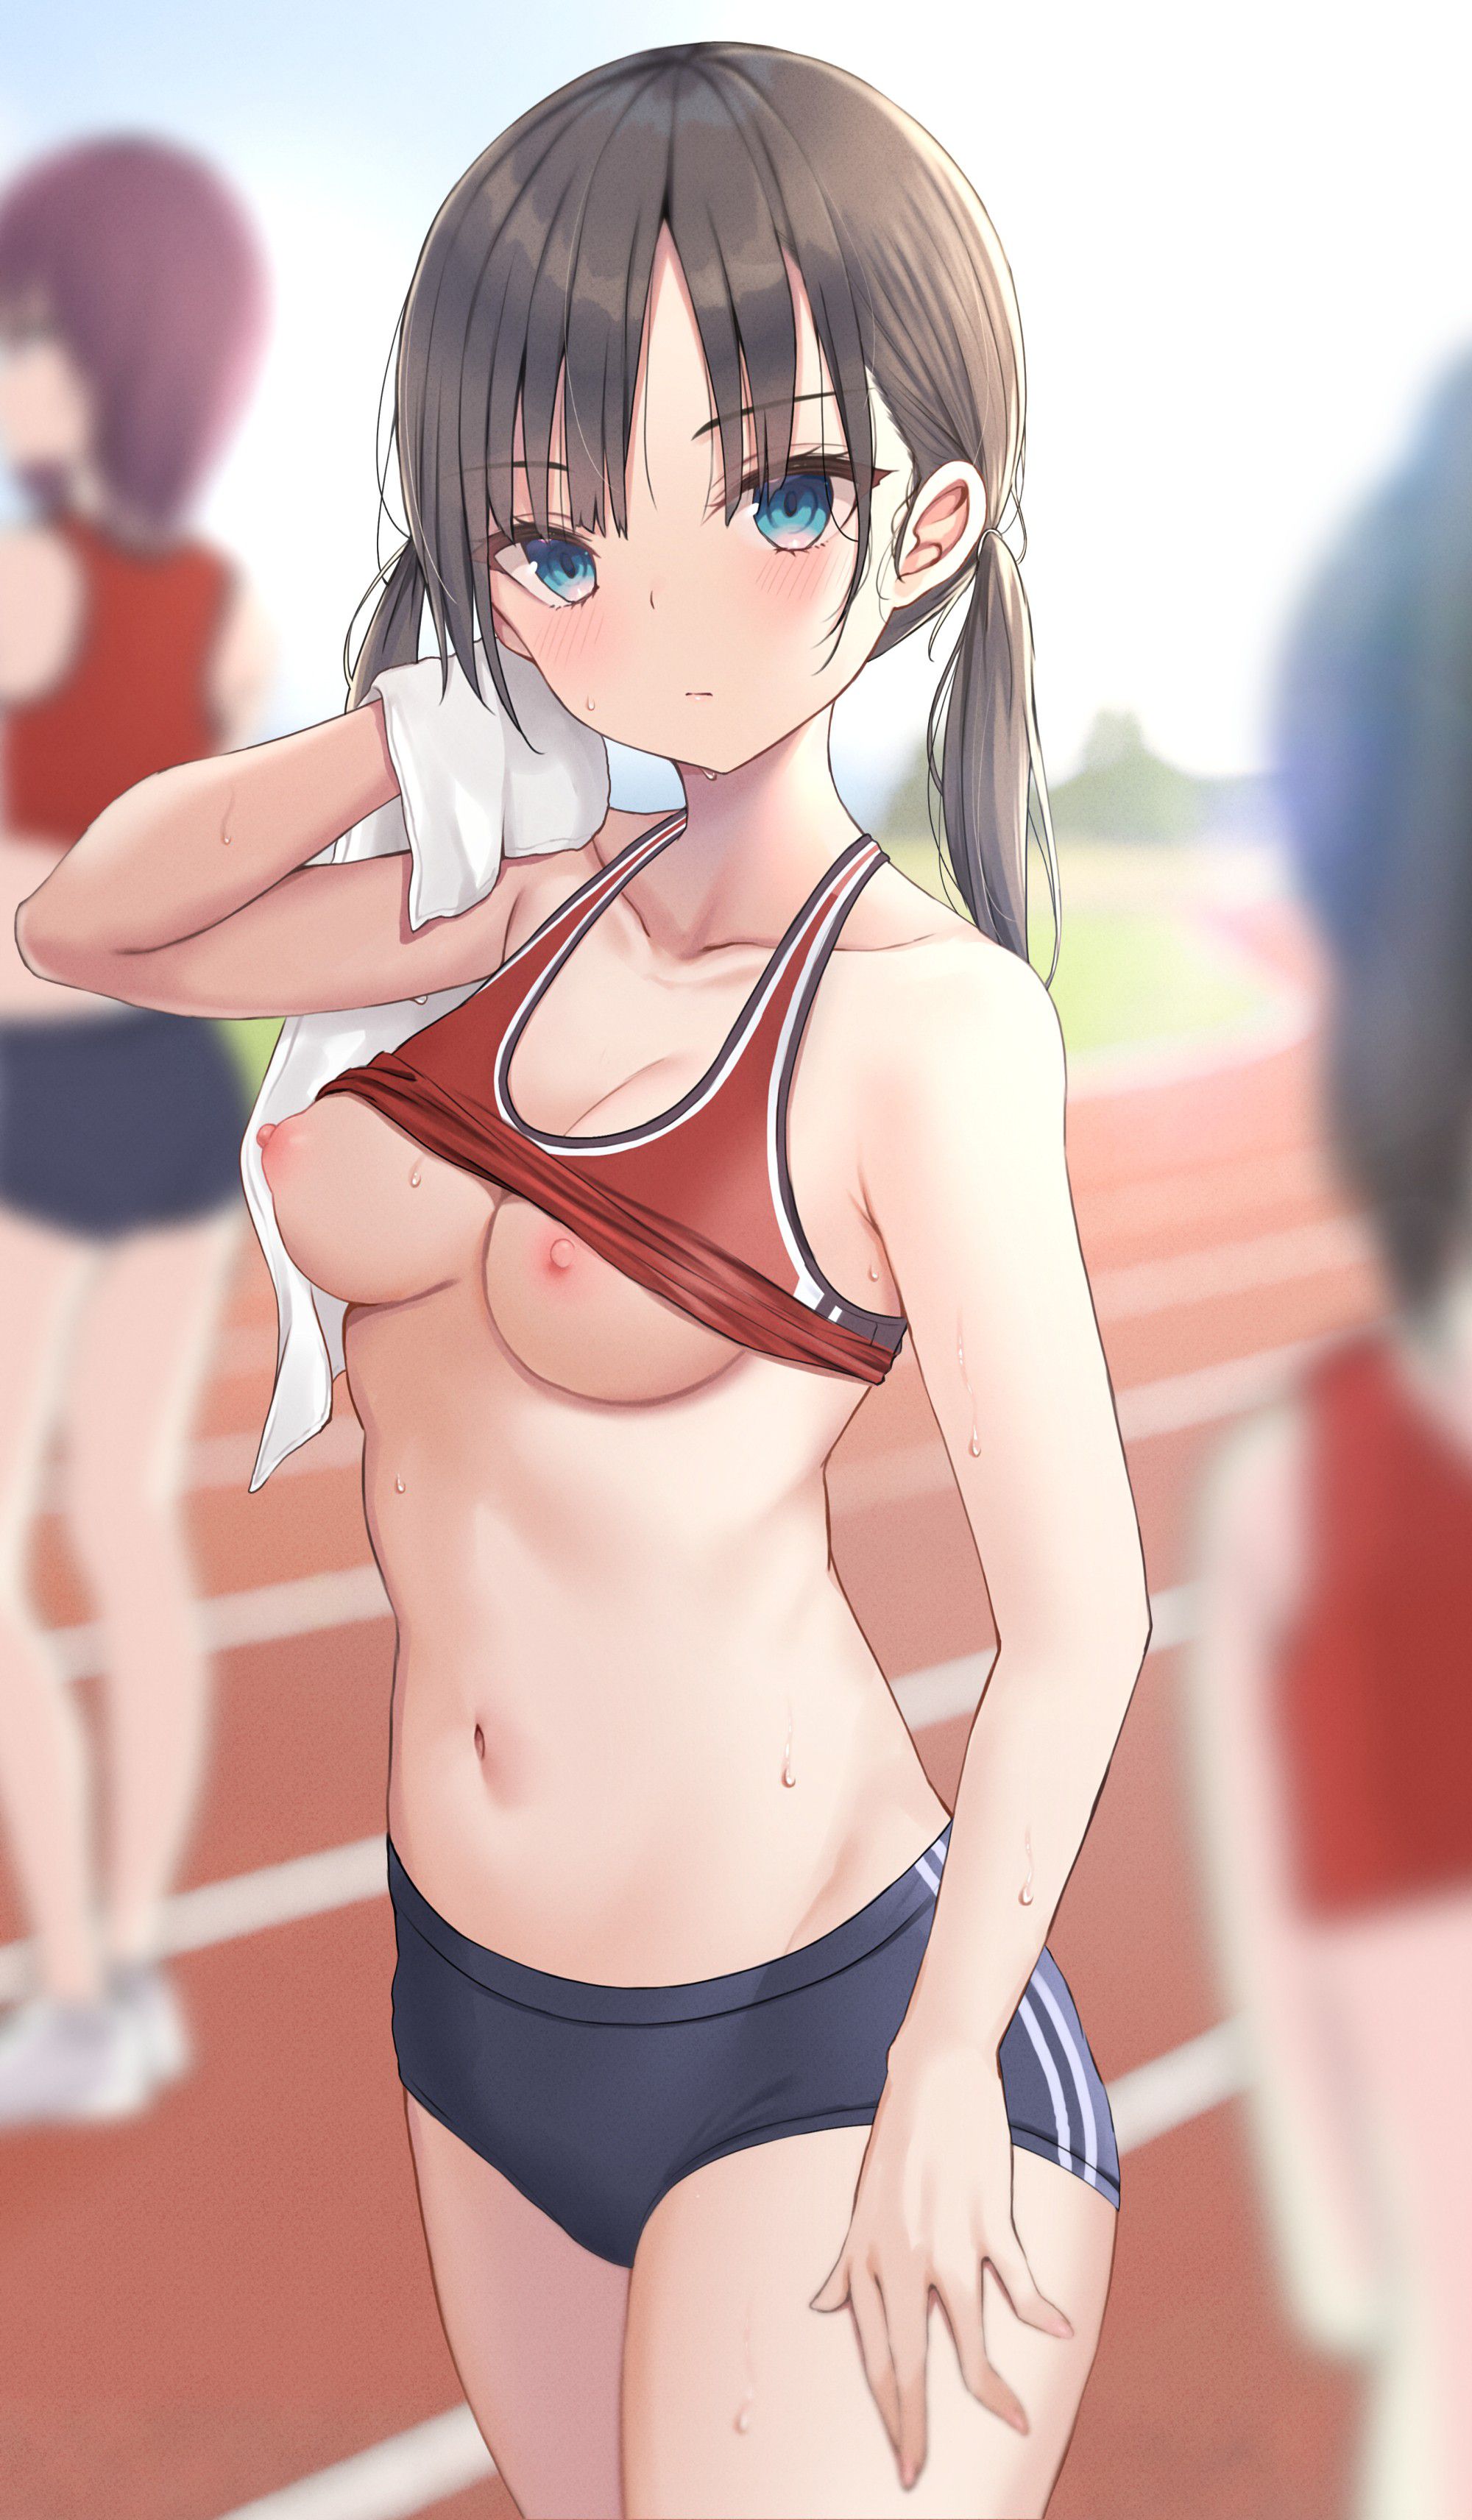 【2nd】Erotic image of a girl in sportswear Part 8 18